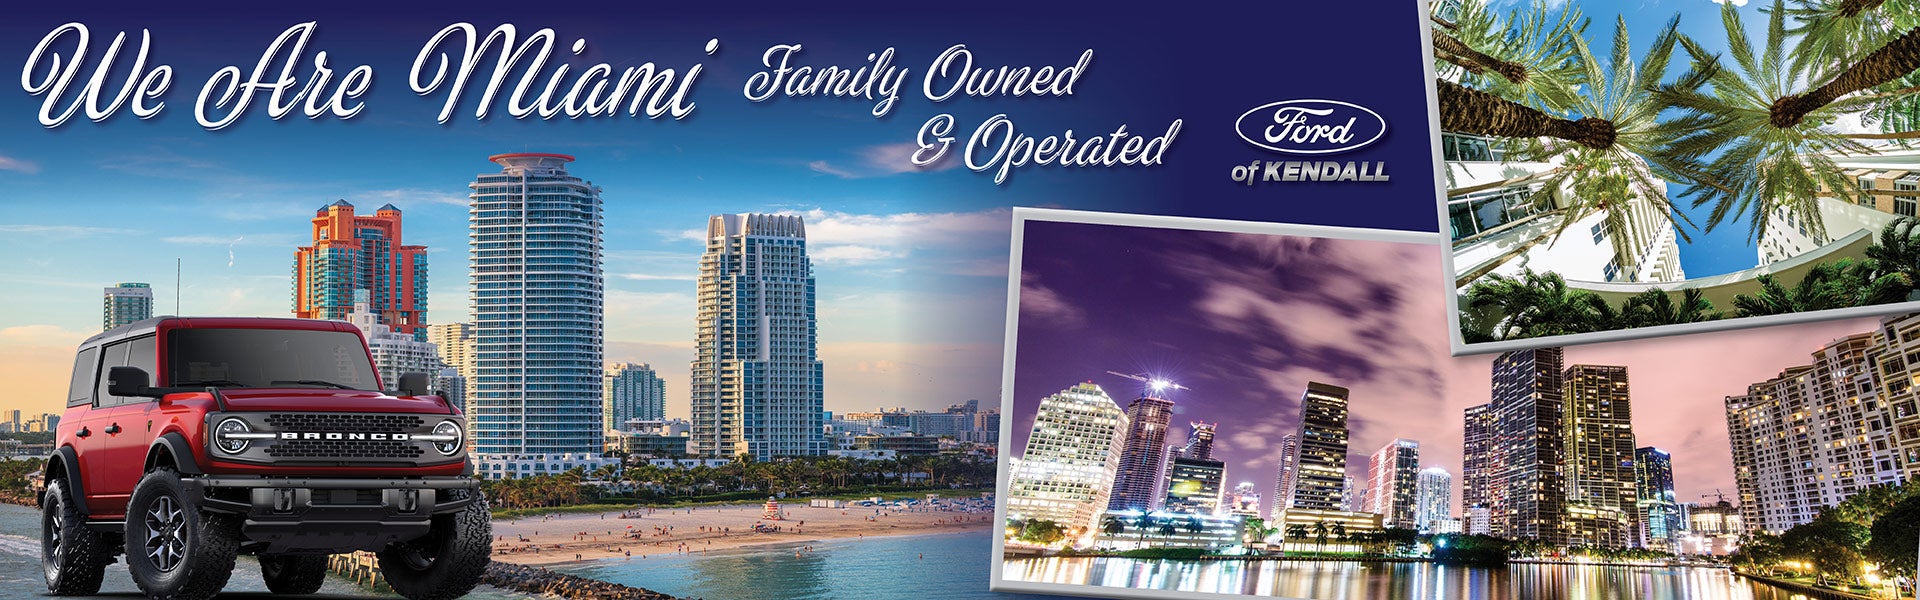 We are Miami Family Owned and Operated